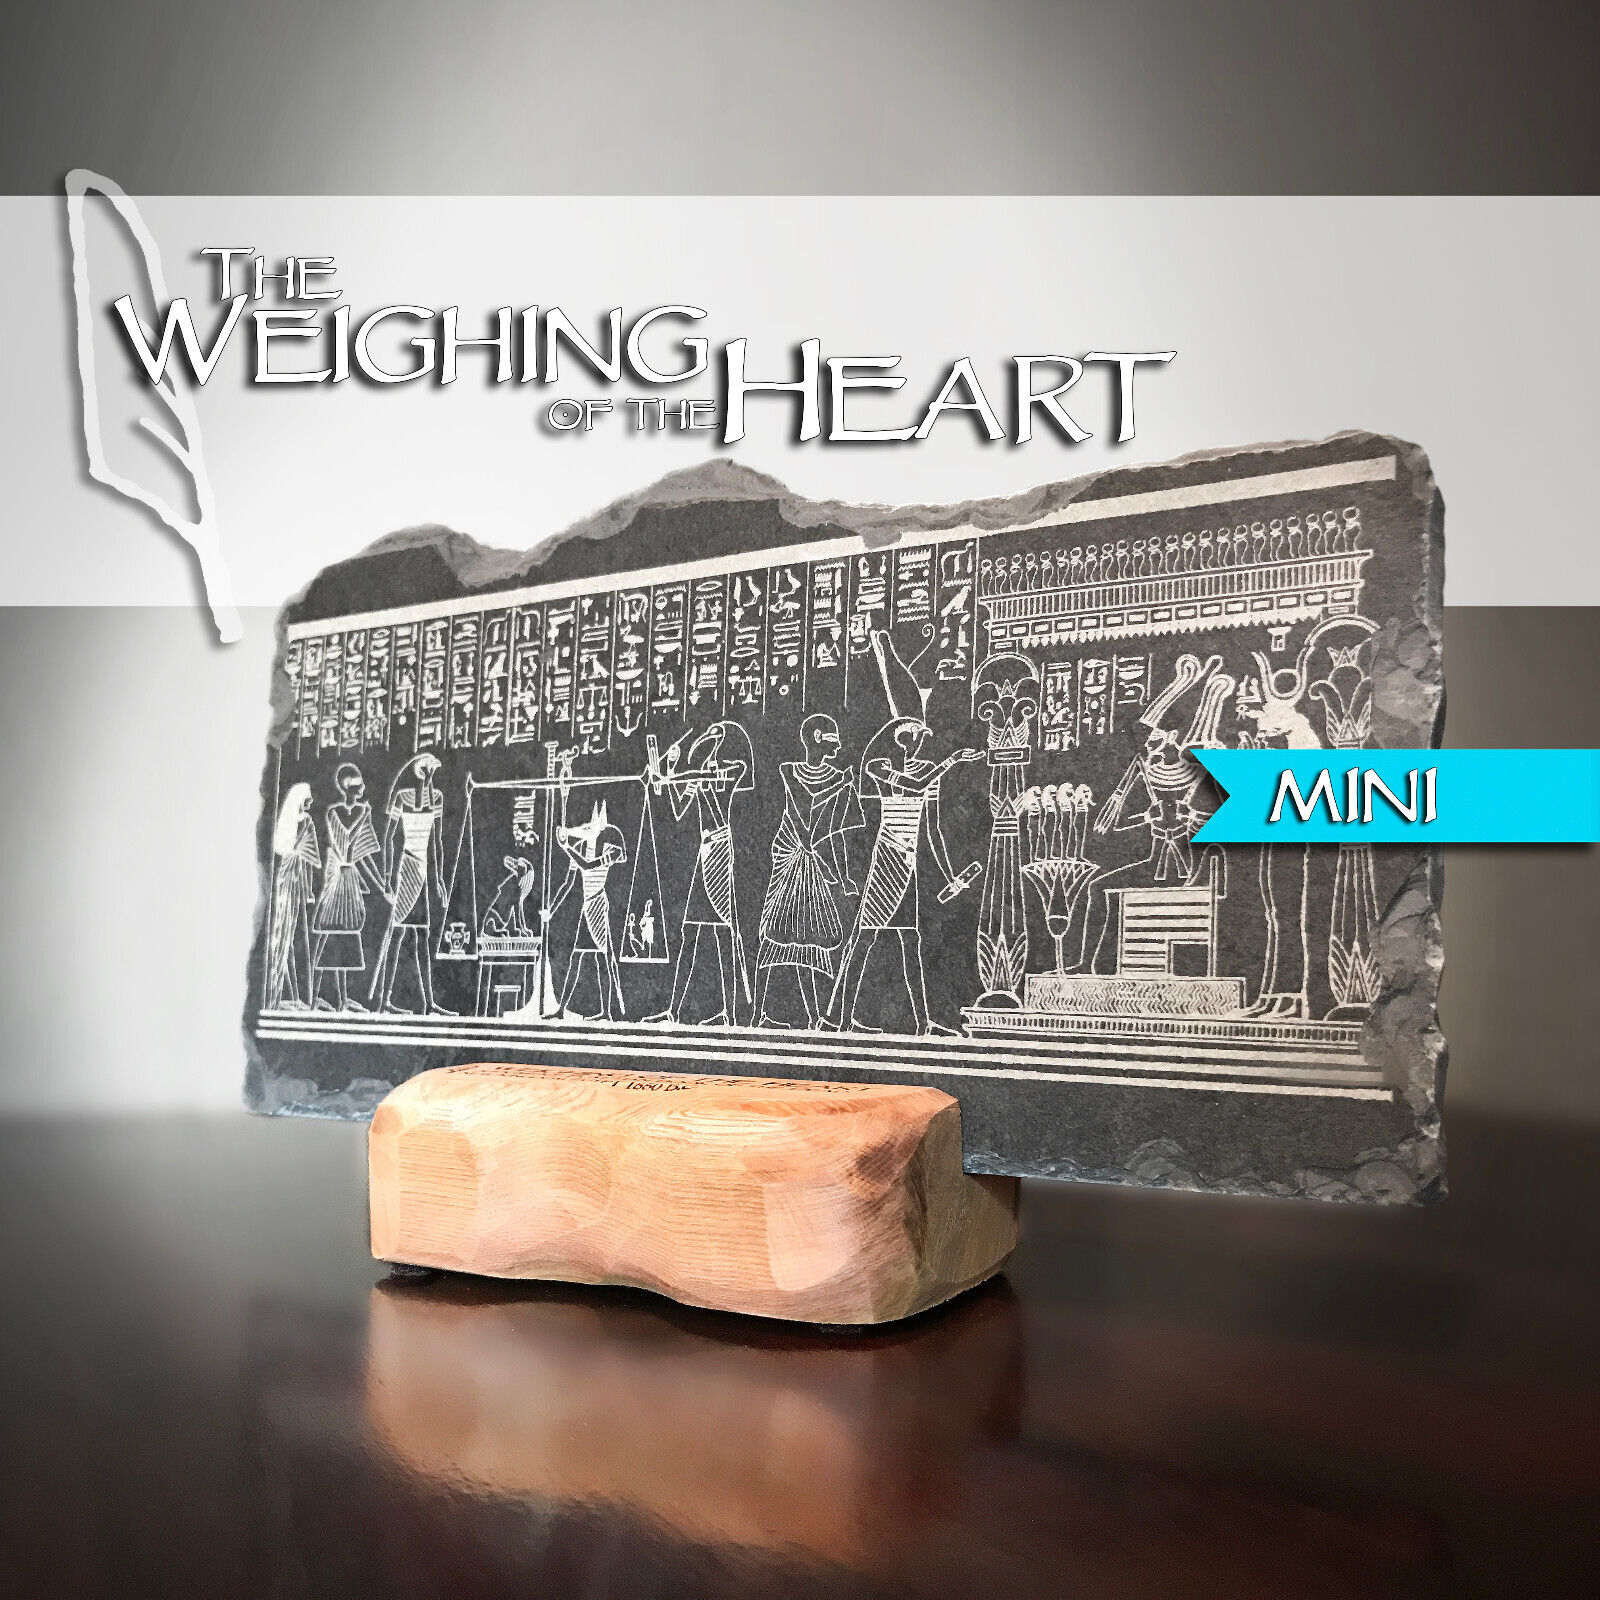 Egyptian Famous Weighing of the Heart MINI Hieroglyph Tablet Panel Pictograph